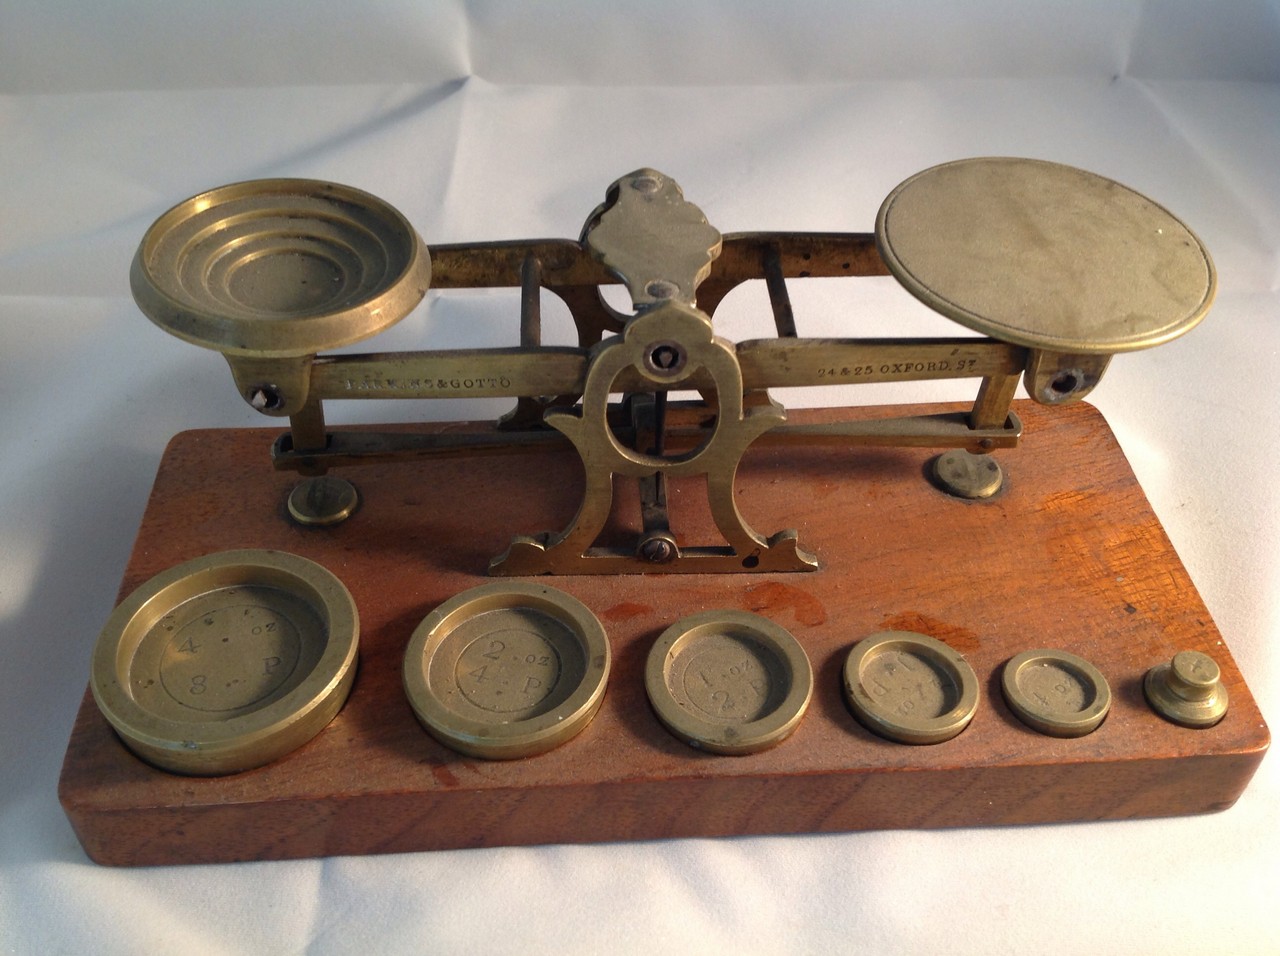 A set of Victorian postal scales by Parkins & Gotto, 24/25 Oxford Street, the complete set with